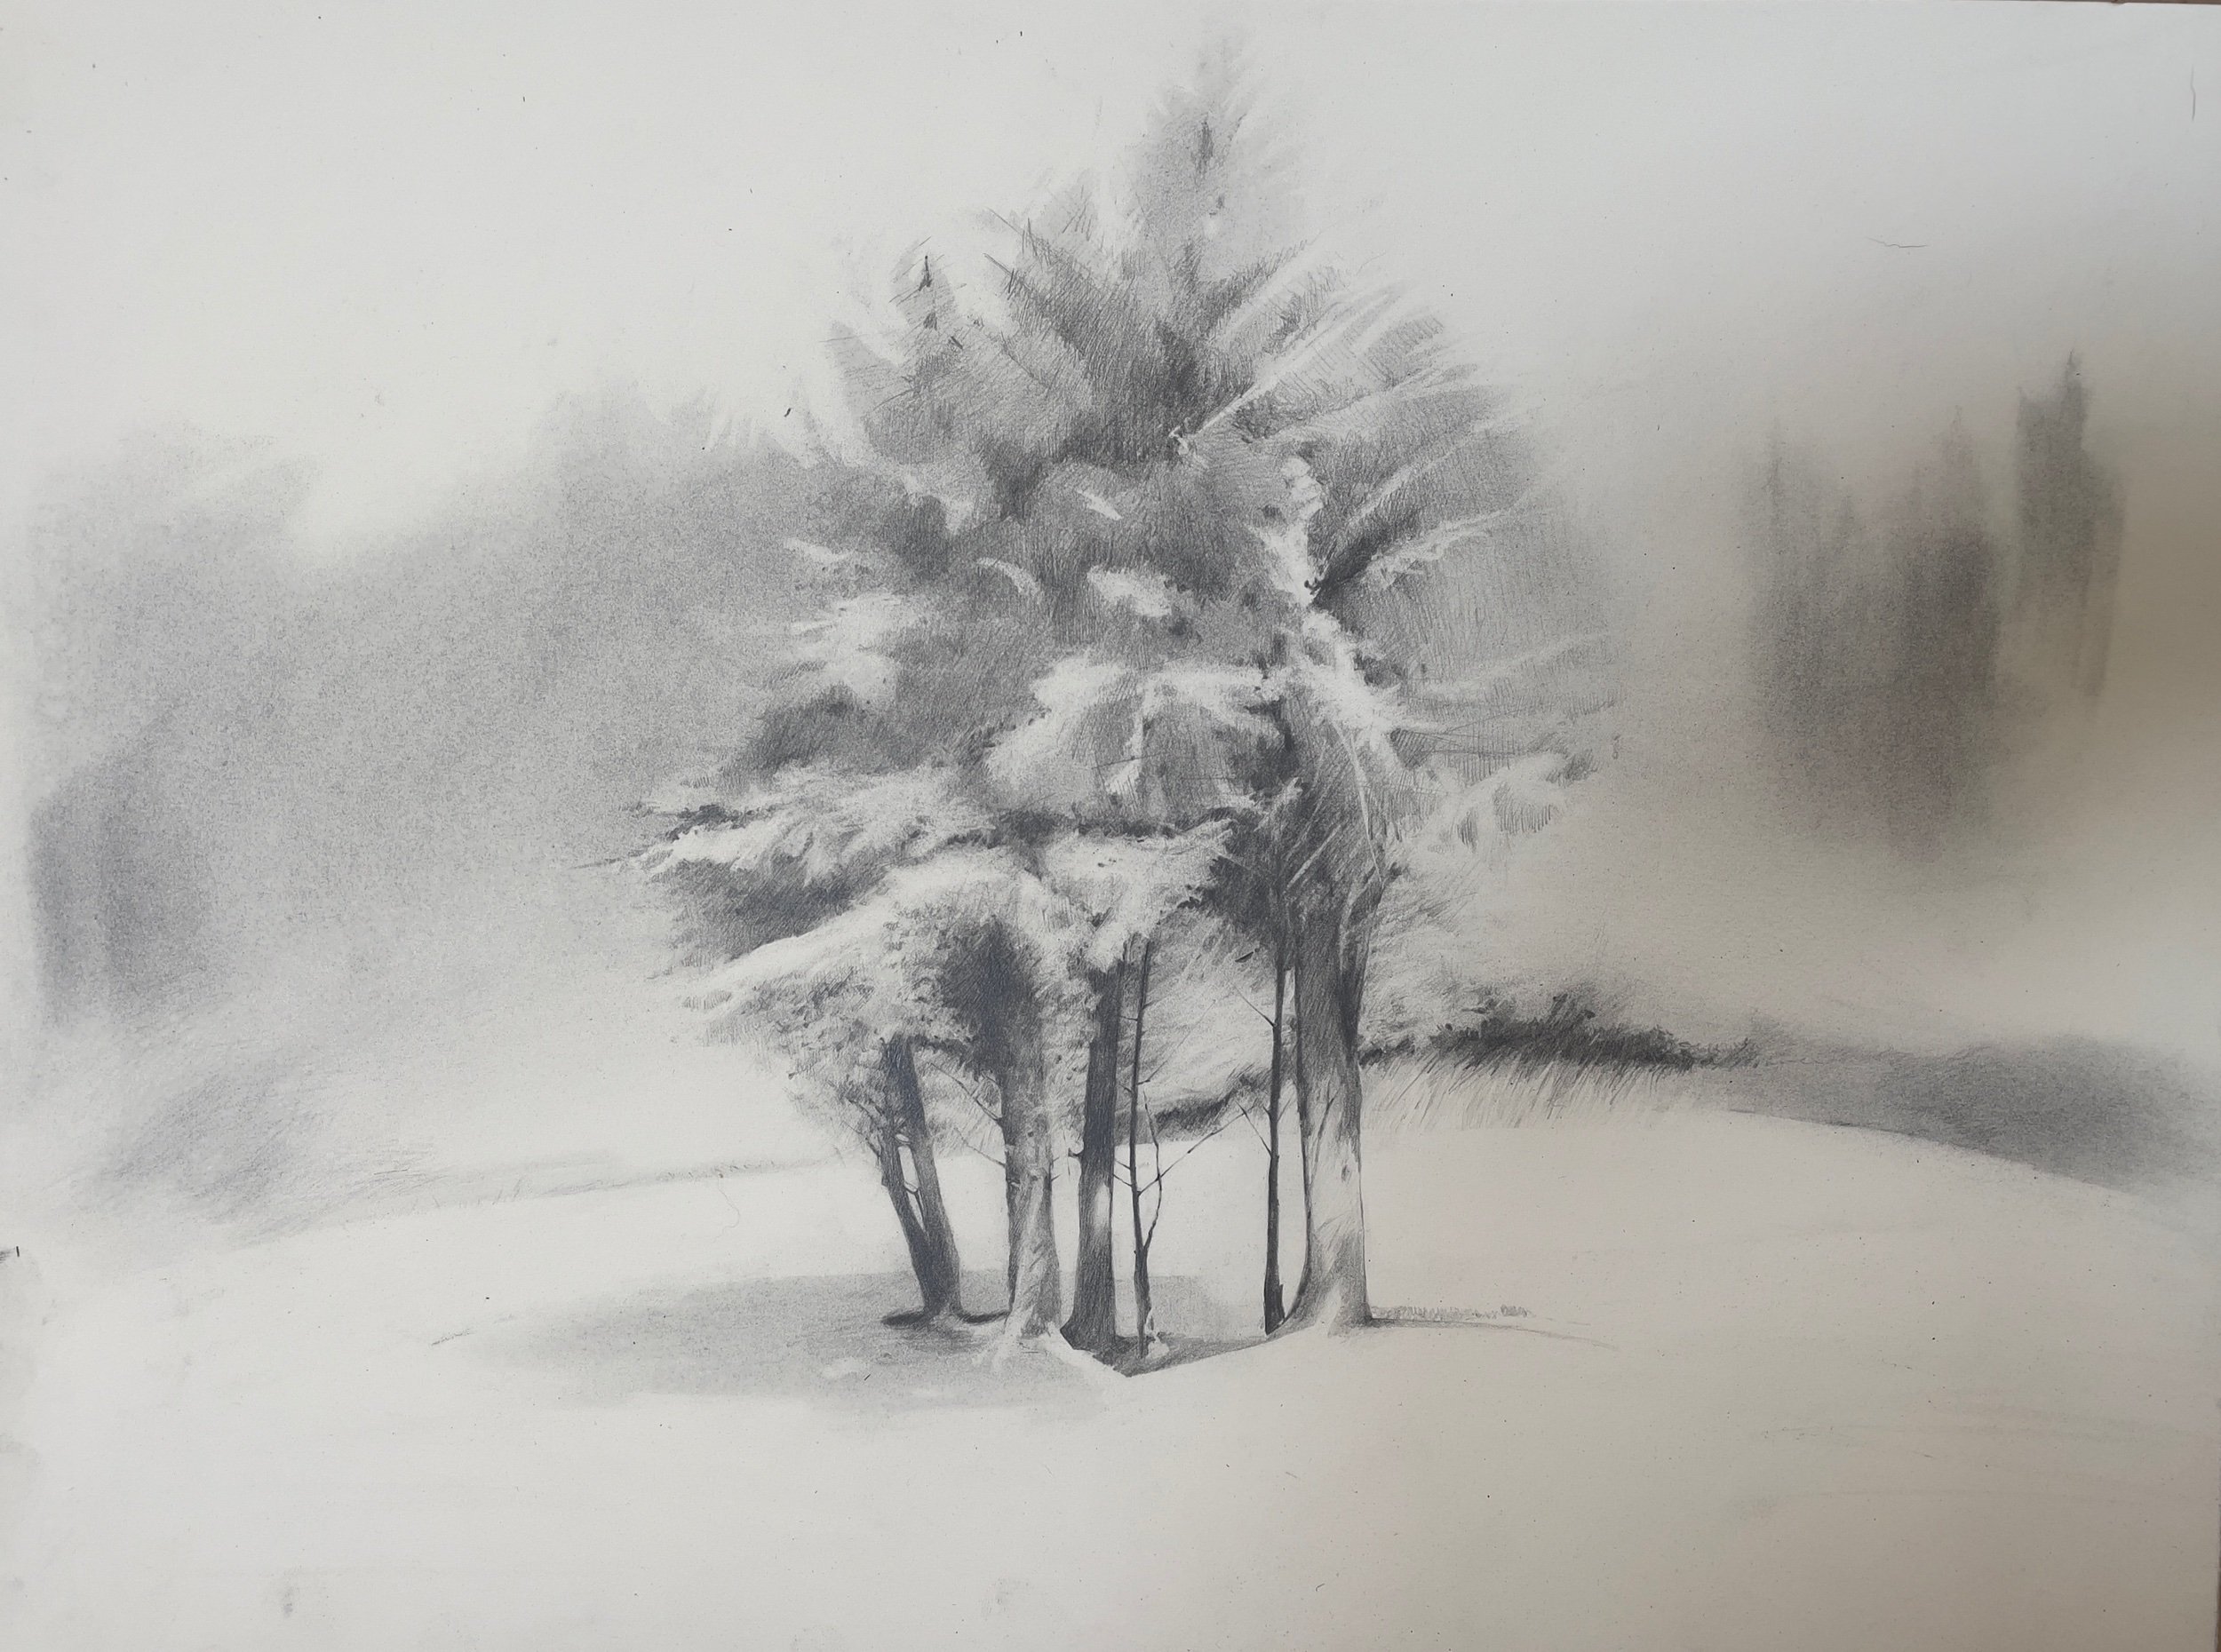   Shaded             by Johanna Connor  graphite and pencil on paper  img: 36 x 48cm     frm: 49 x 61cm  SOLD 